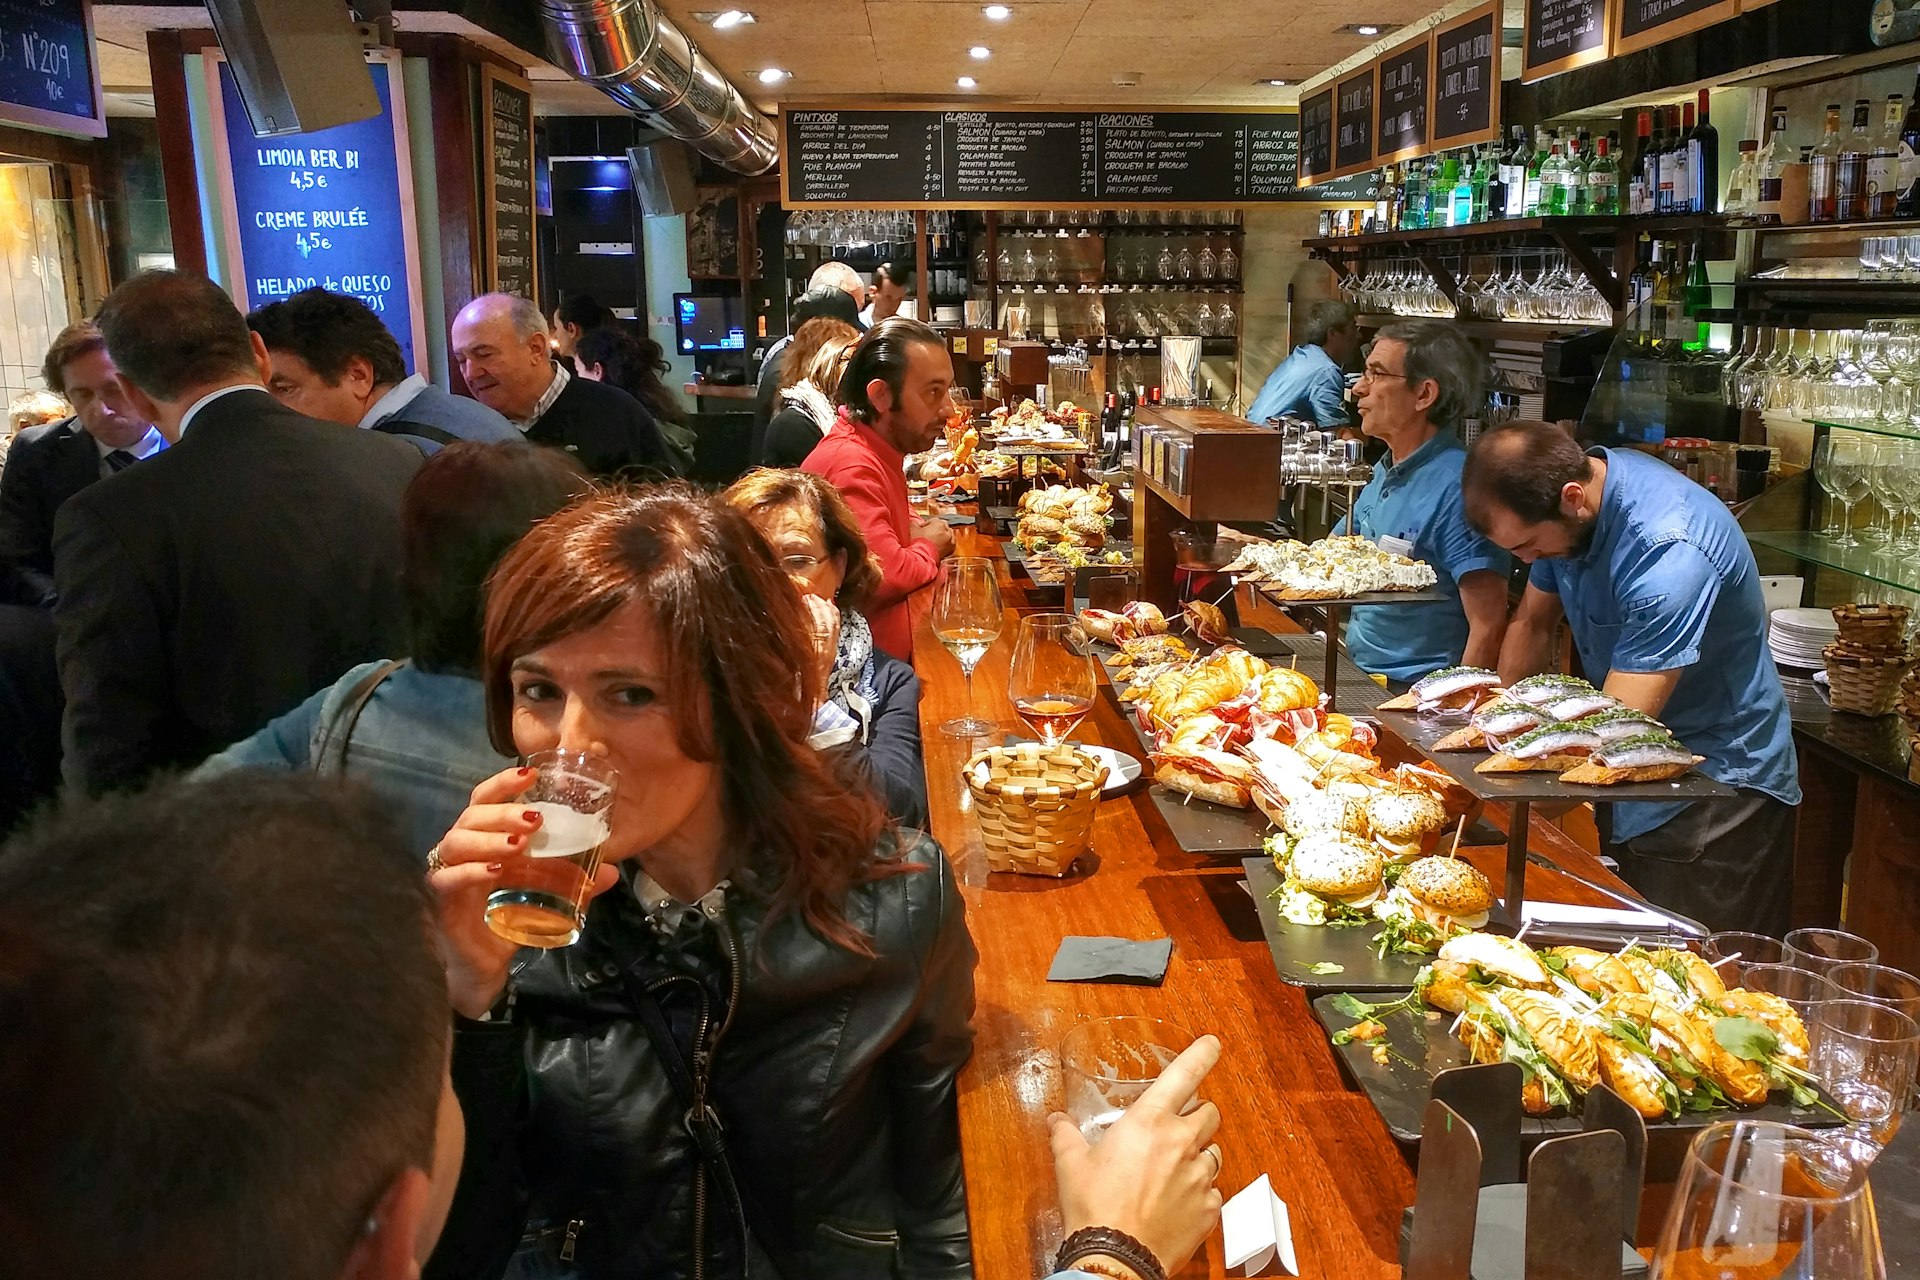 A crowd of people packed into a small restaurant sip ciders and wine set on a long wooden bar. Behind the bar are pintxos on tall metal and wooden stands. Three employees in blue shirts prepare food and beverages.